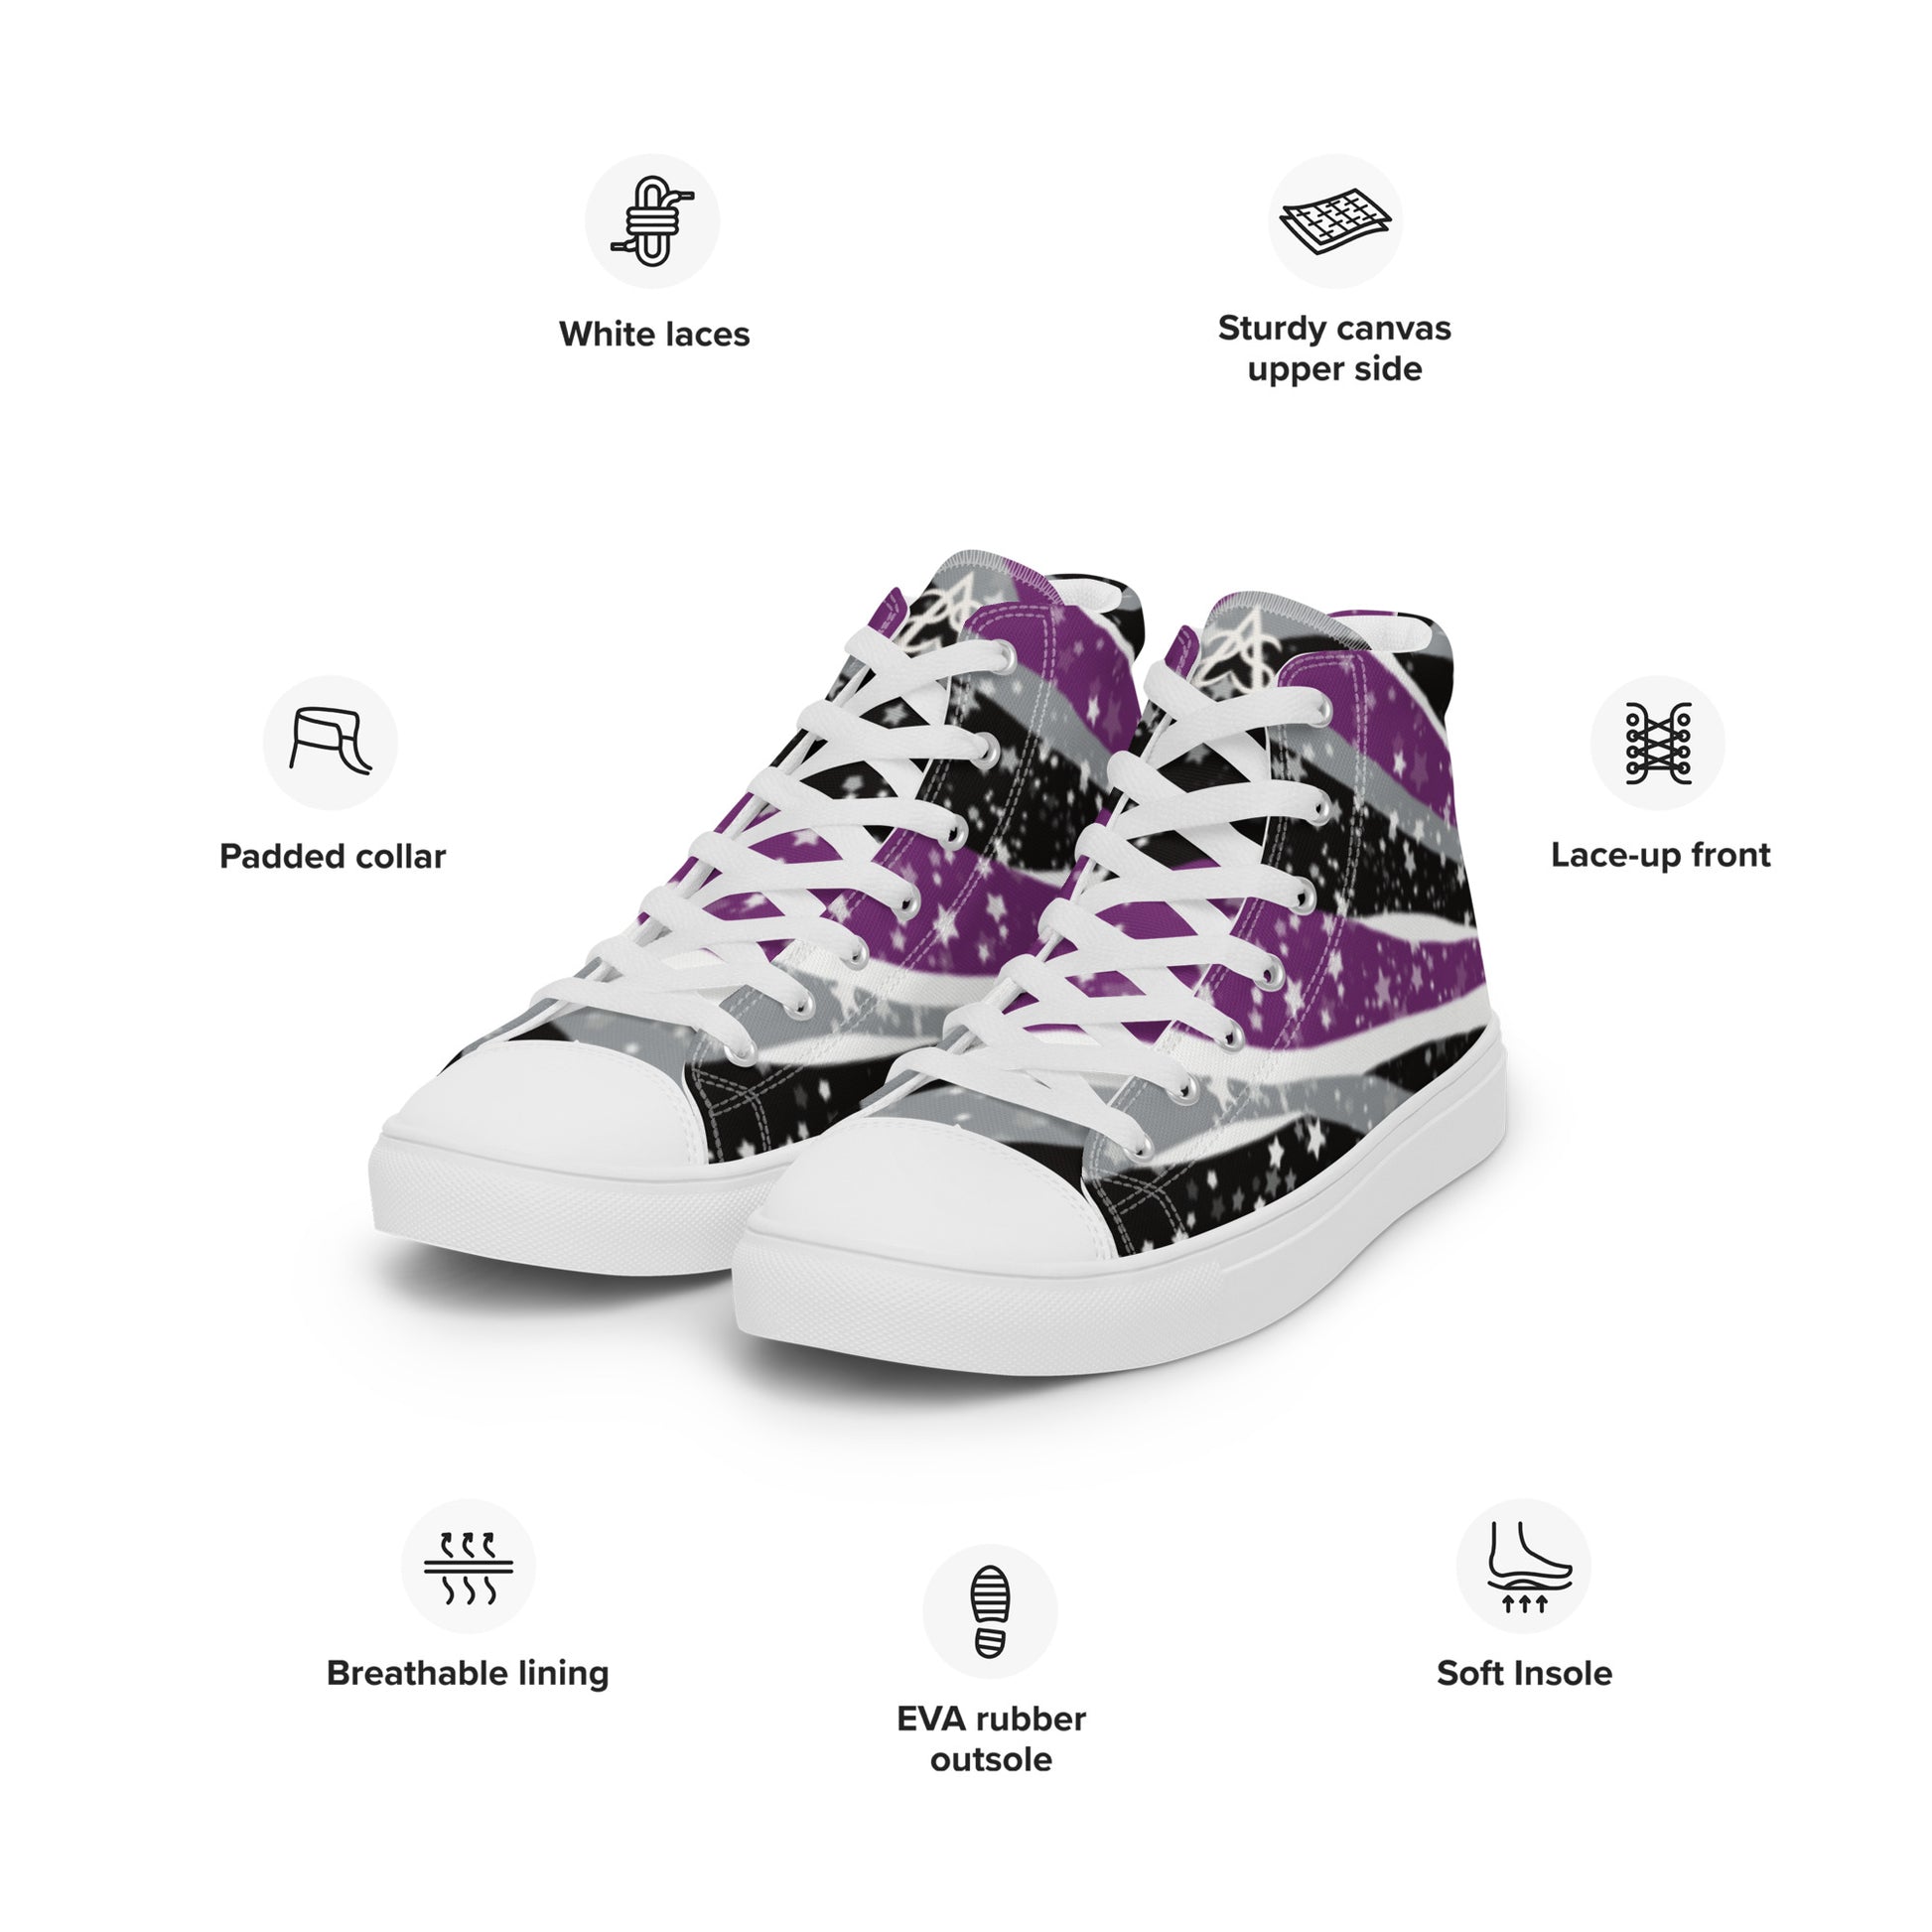 A pair of Starry Asexual high top shoes with product features: white laces, sturdy canvas upper side, lace up front, soft insole, EVA rubber outsole, Breathable lining, and padded collar.